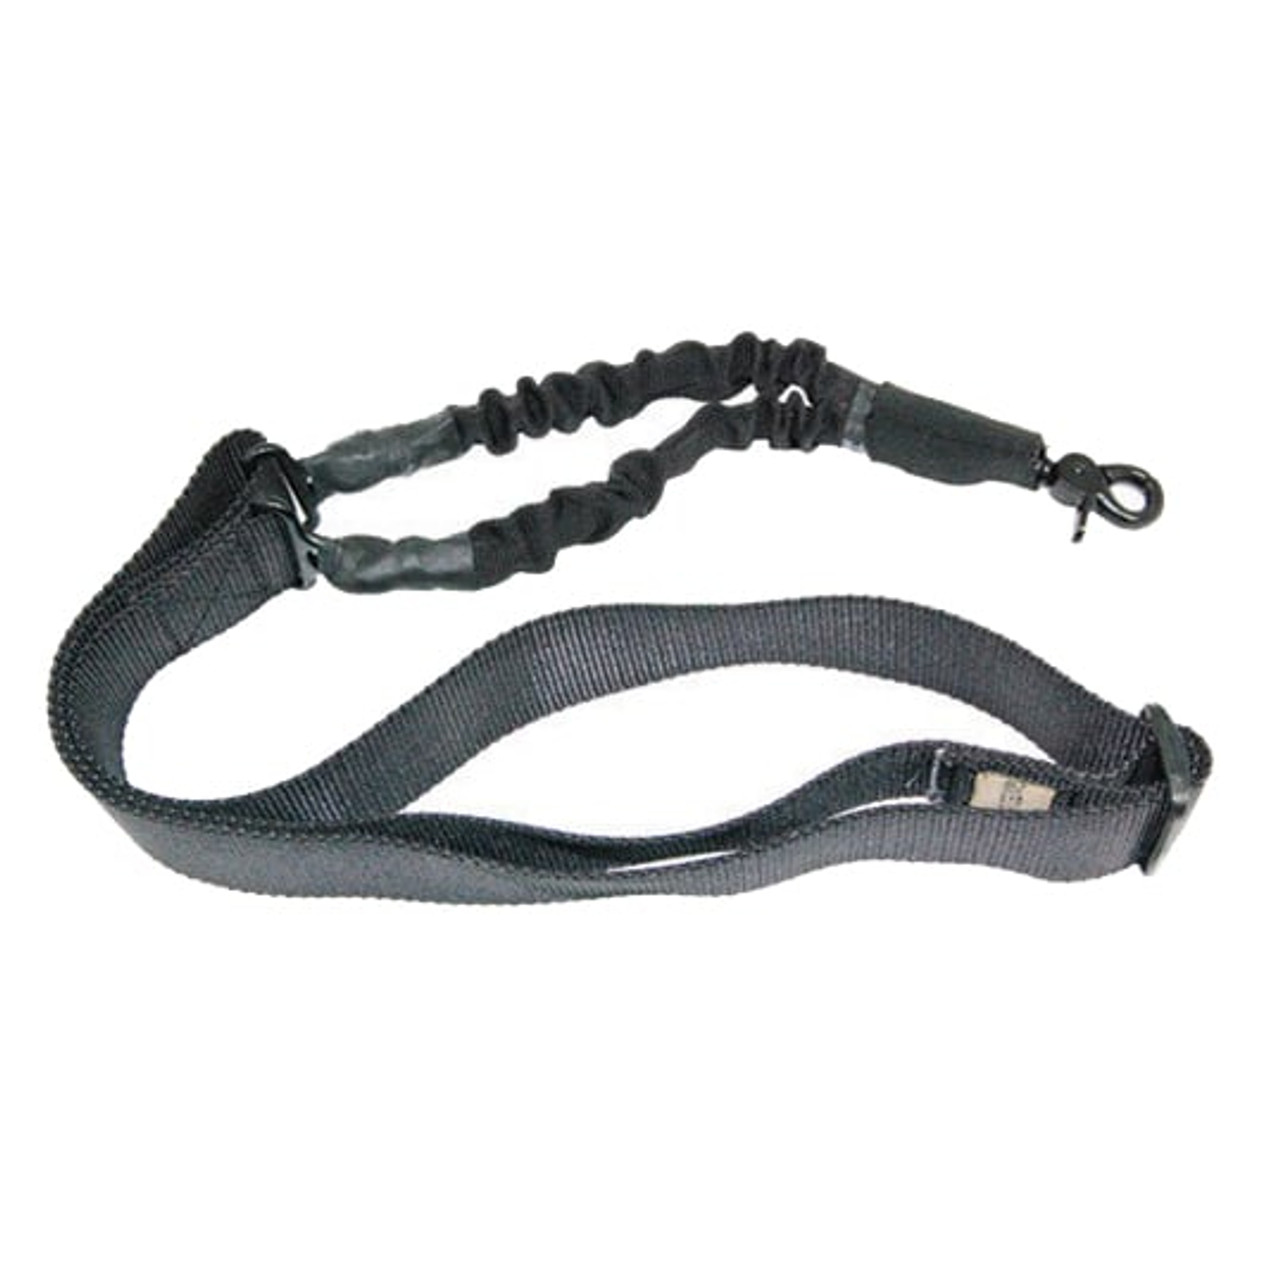 Guntec USA 1POINT-B One Point Bungee Sling With QD Snap Hook